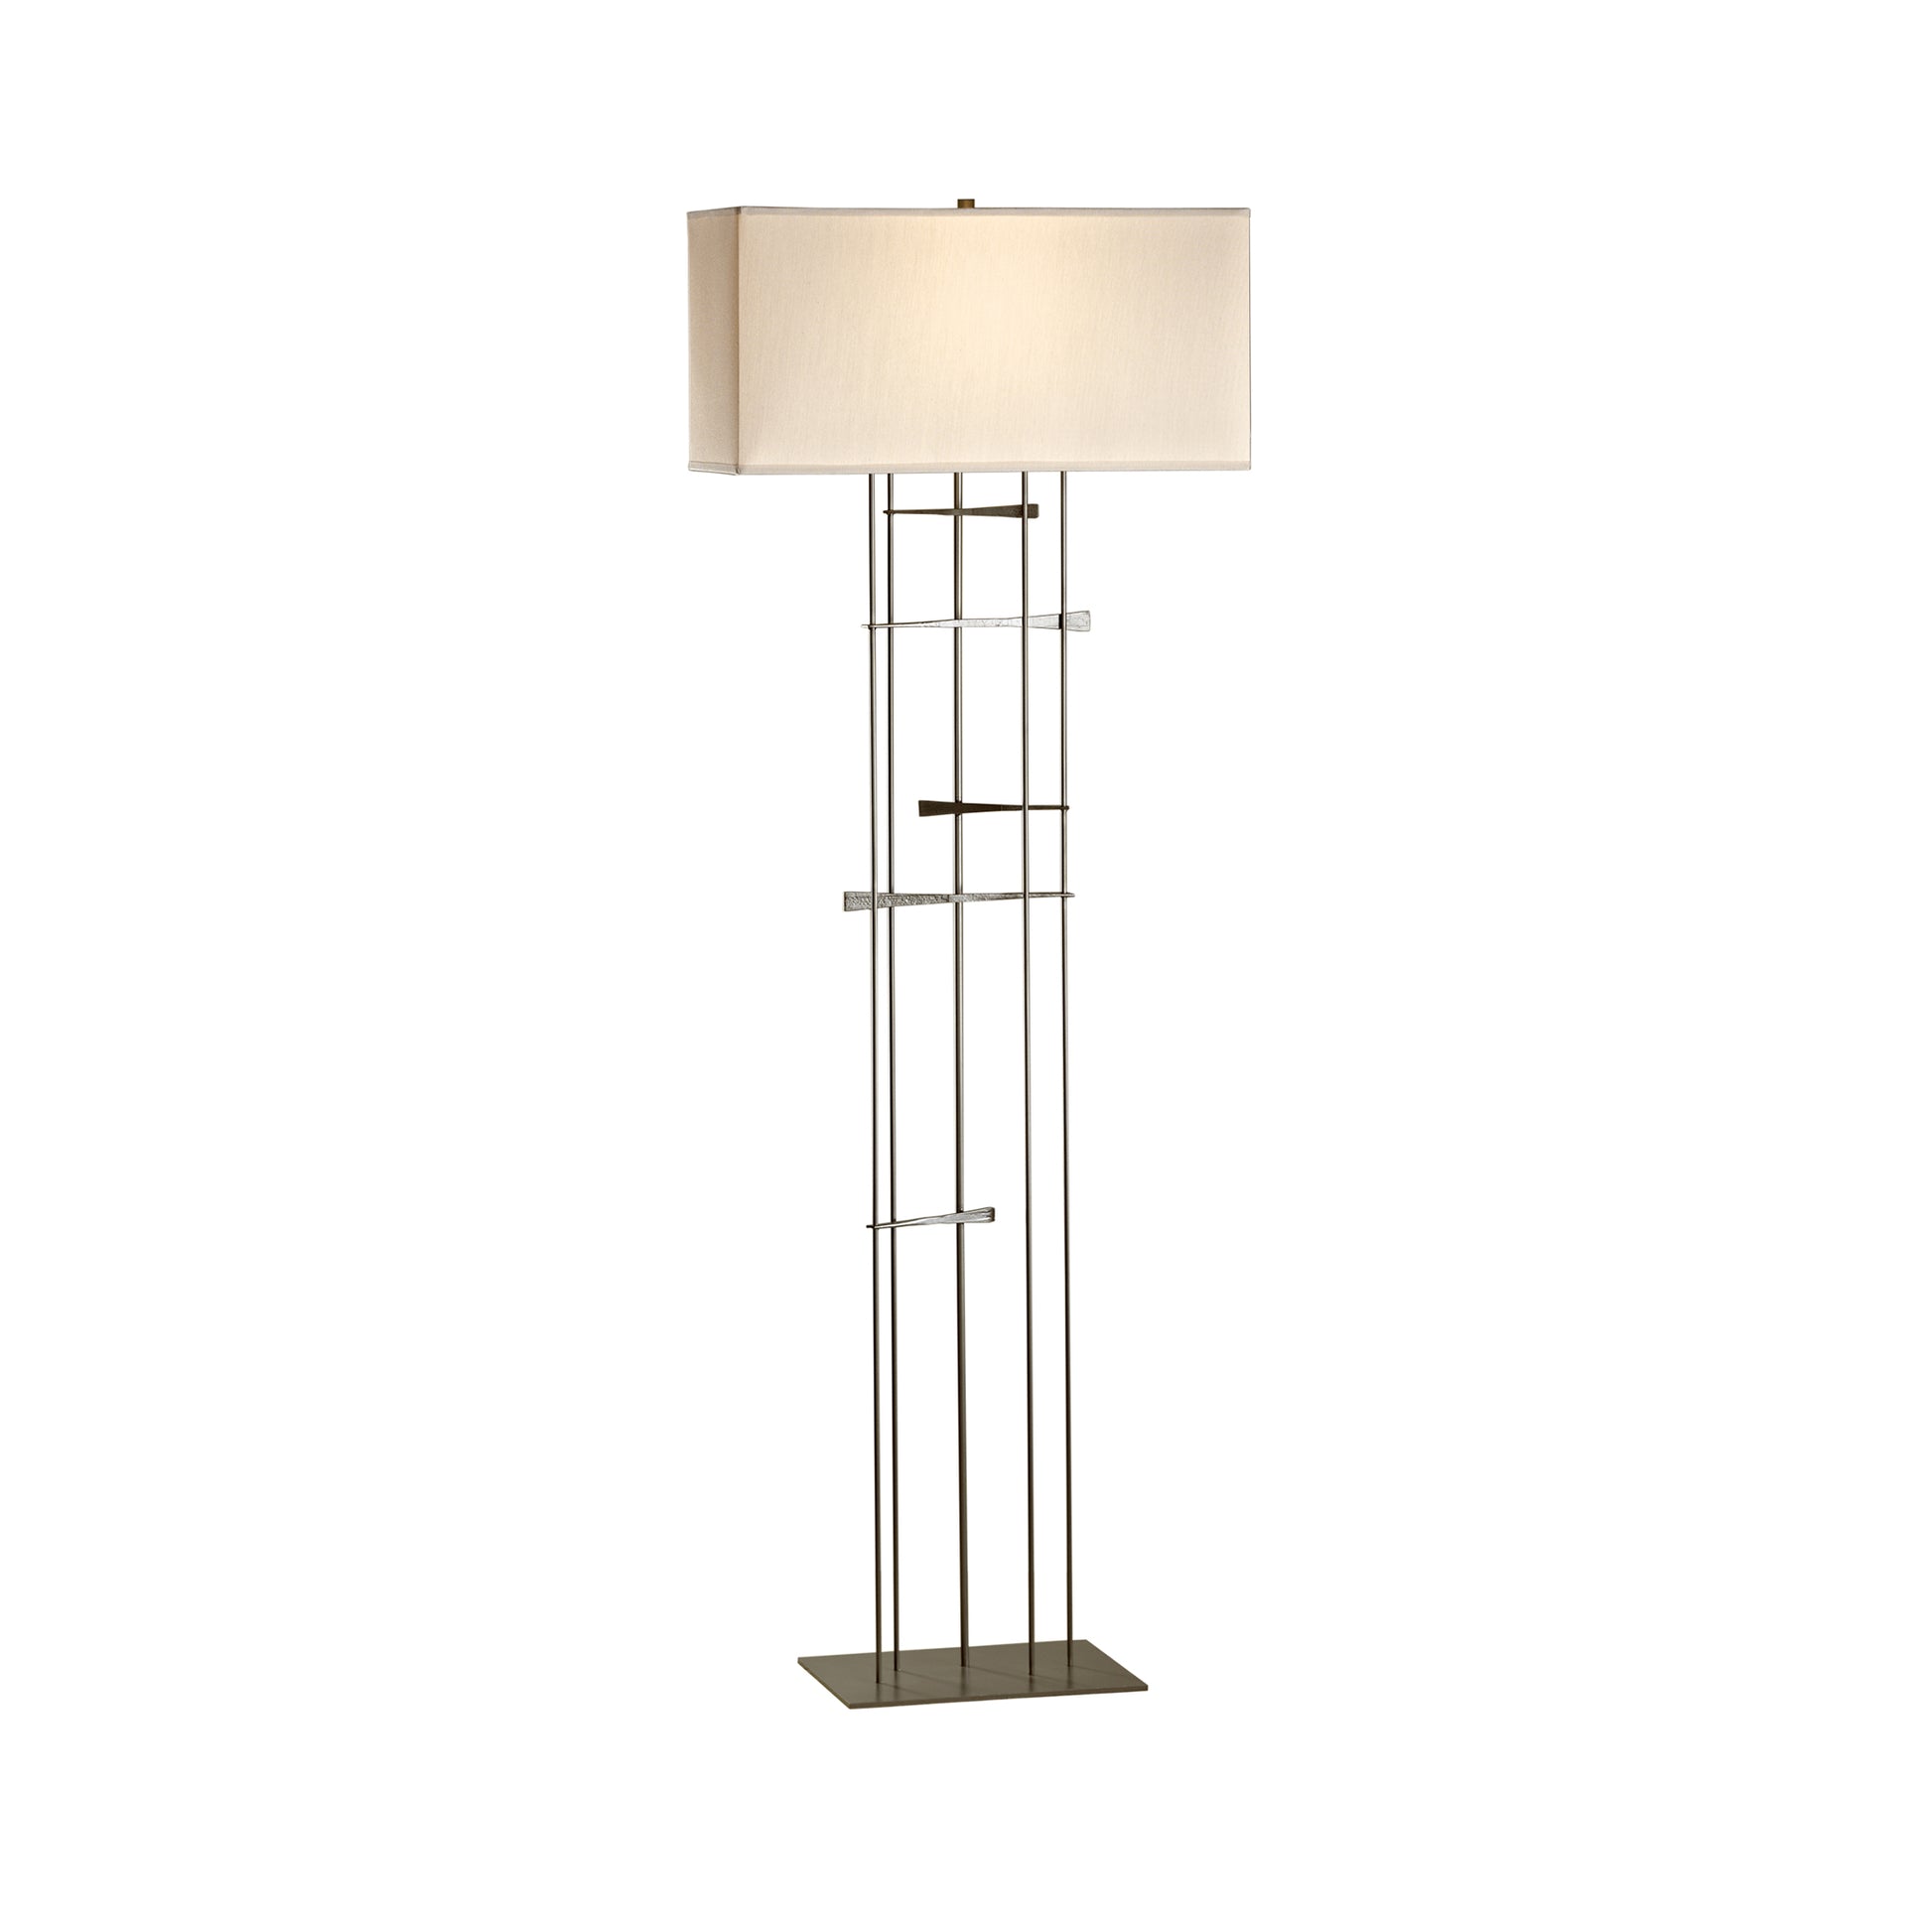 A Hubbardton Forge Cavaletti Floor Lamp with a rectangular beige shade and a metal finish base featuring a unique, geometric design of overlapping squares and rectangles.